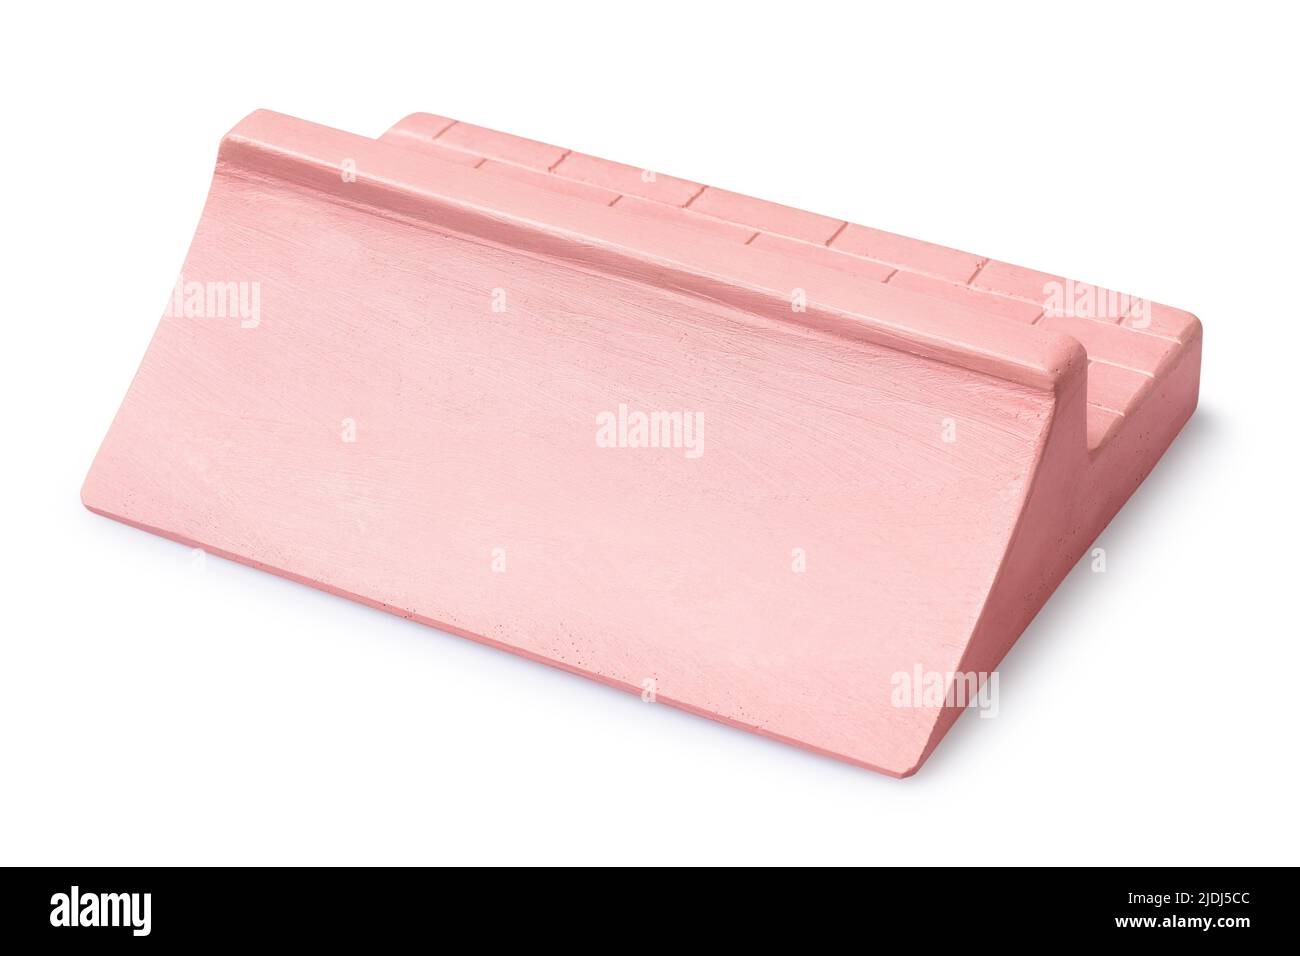 Pink plaster ramp with two sides for fingerboarding, isolated on a white background Stock Photo